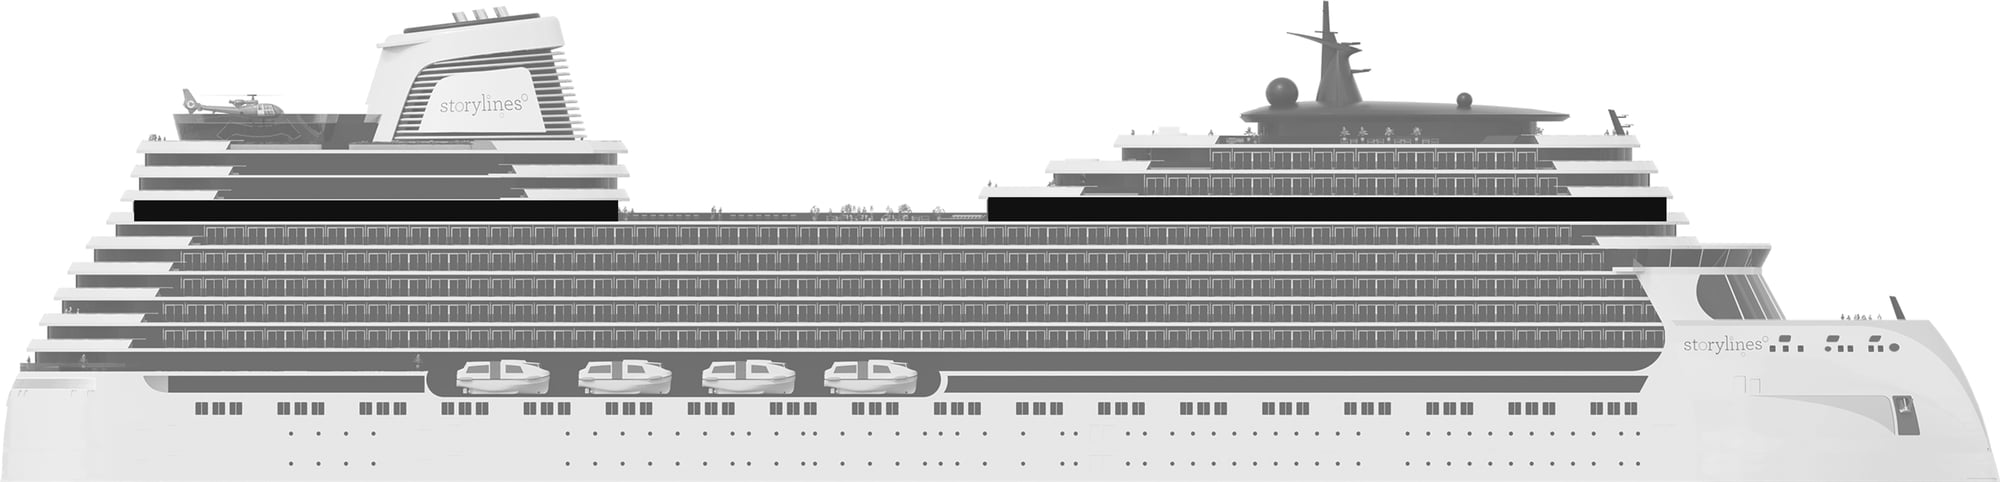 Profile shot of Storylines residential ship showing the location of Deck 15